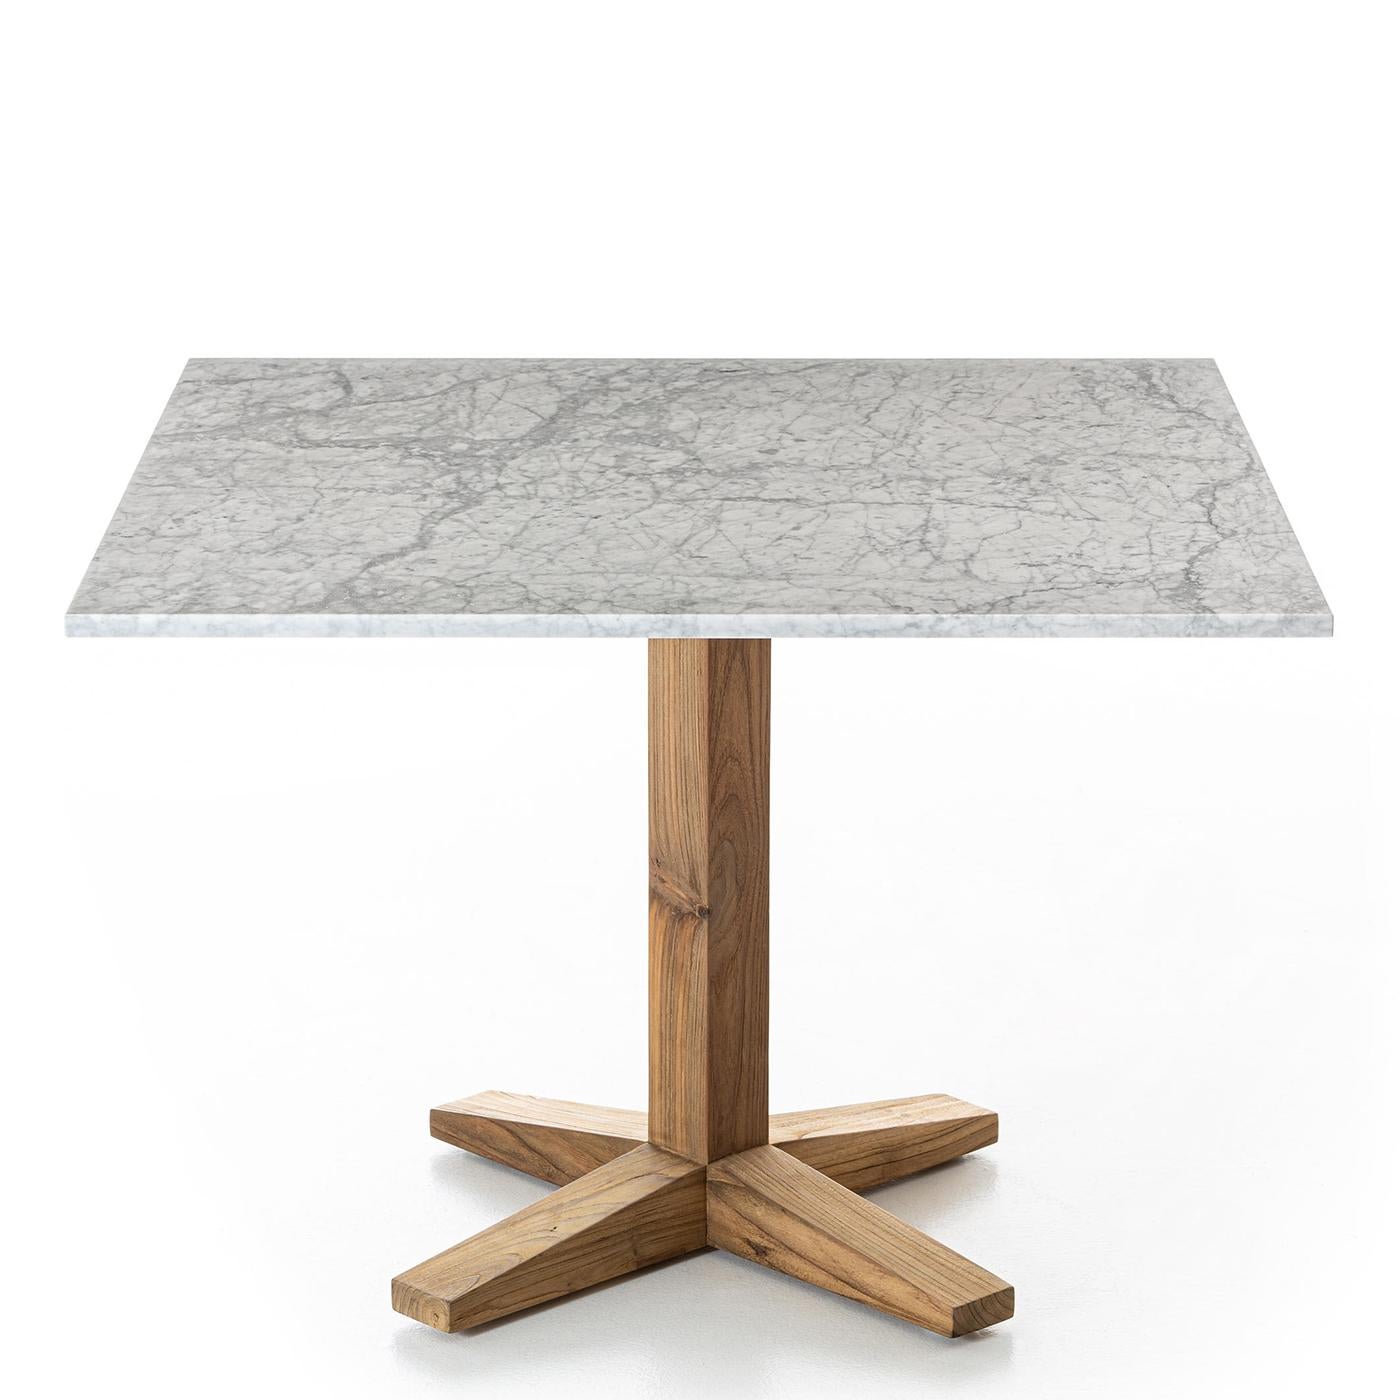 Table square low Barletta with structure in solid teak
wood and with polished carrare white marble top.